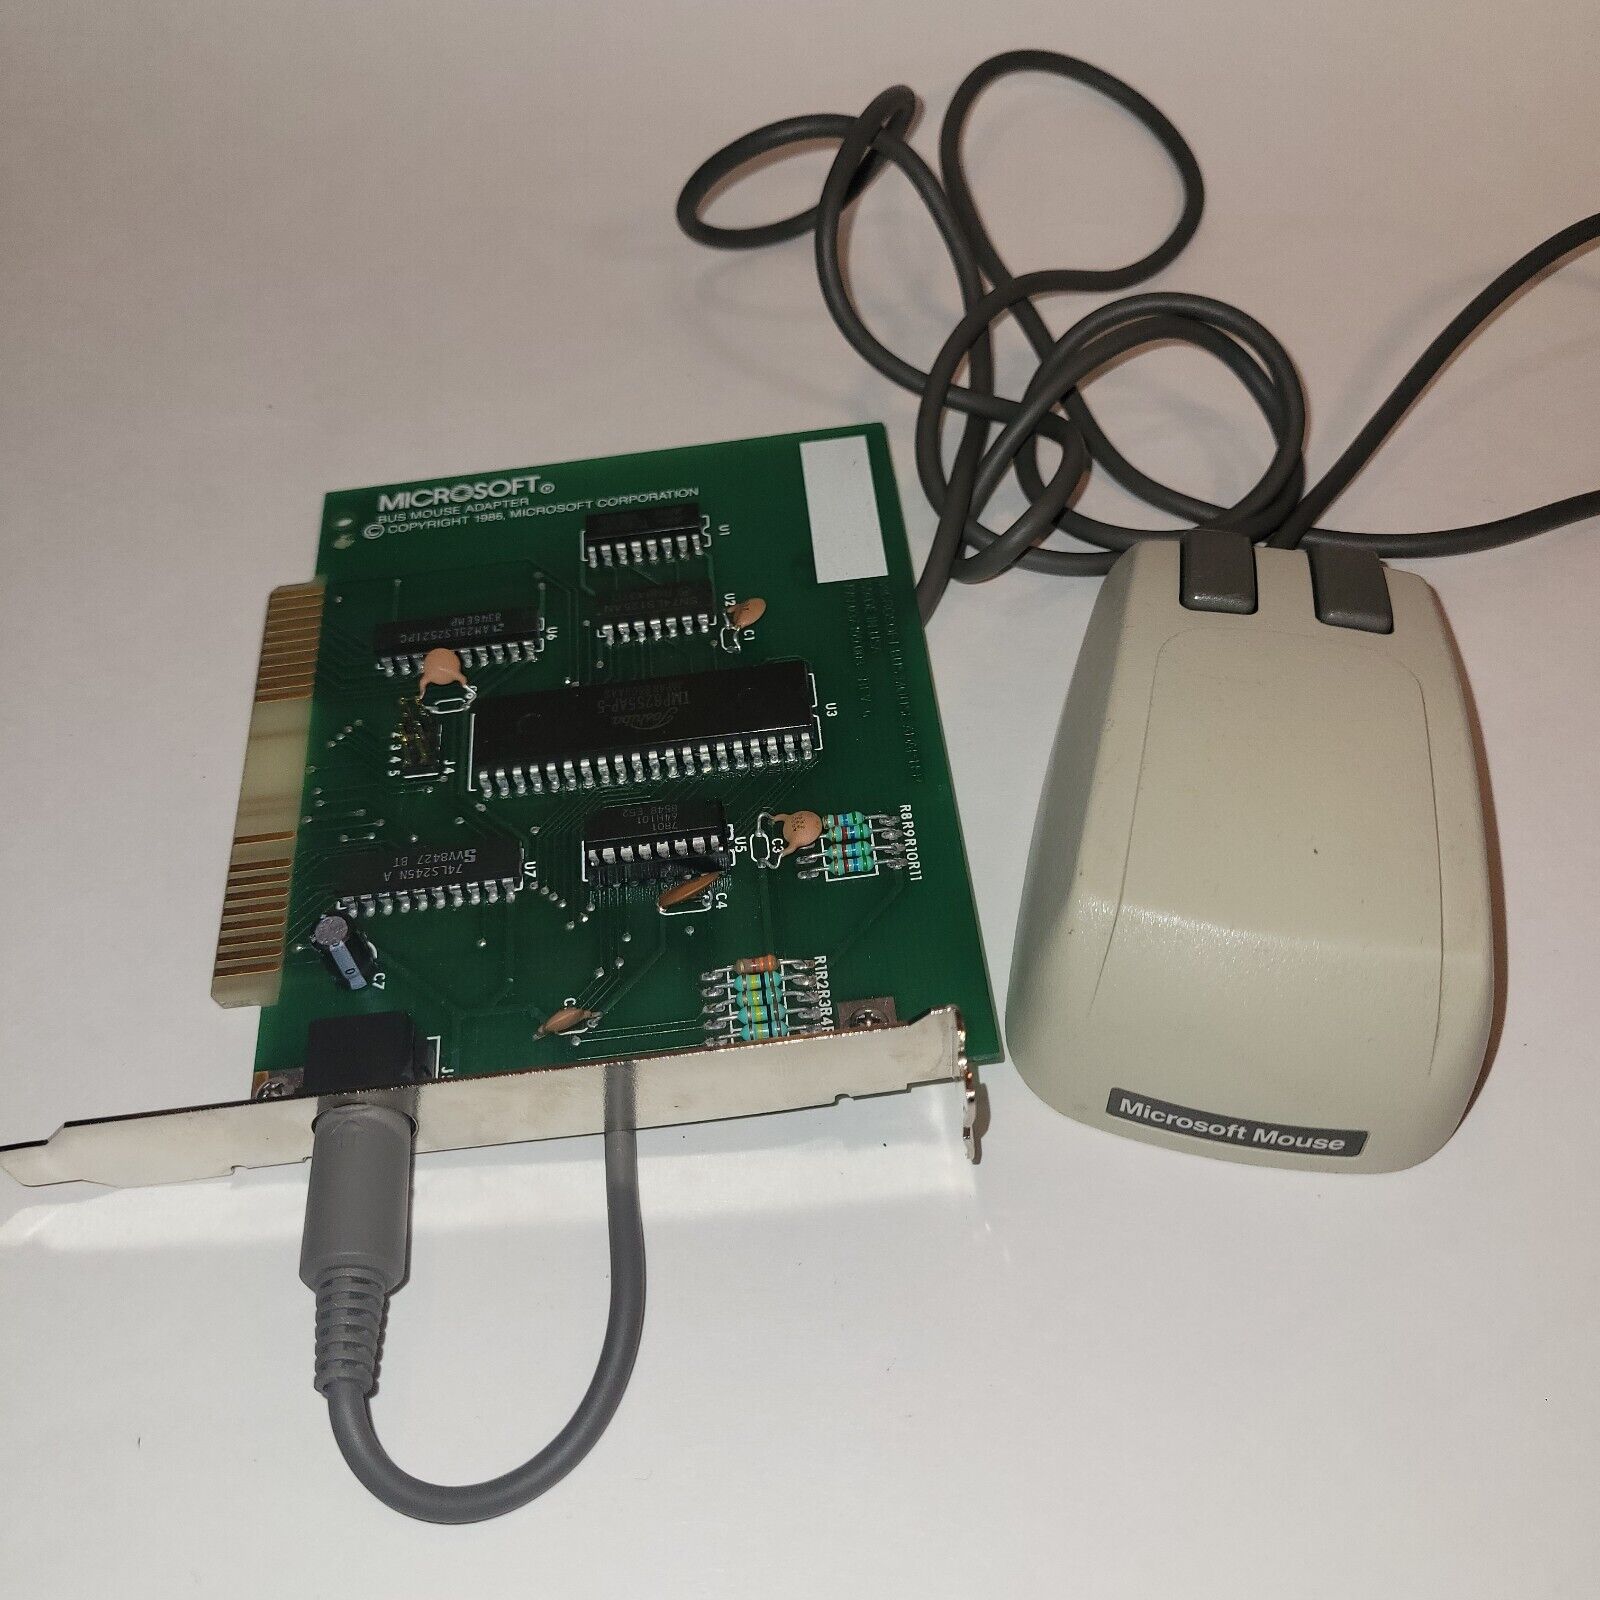 Vintage 1986 Microsoft Bus Mouse Adapter w/ 9 pin 2-Button Gray & White Mouse